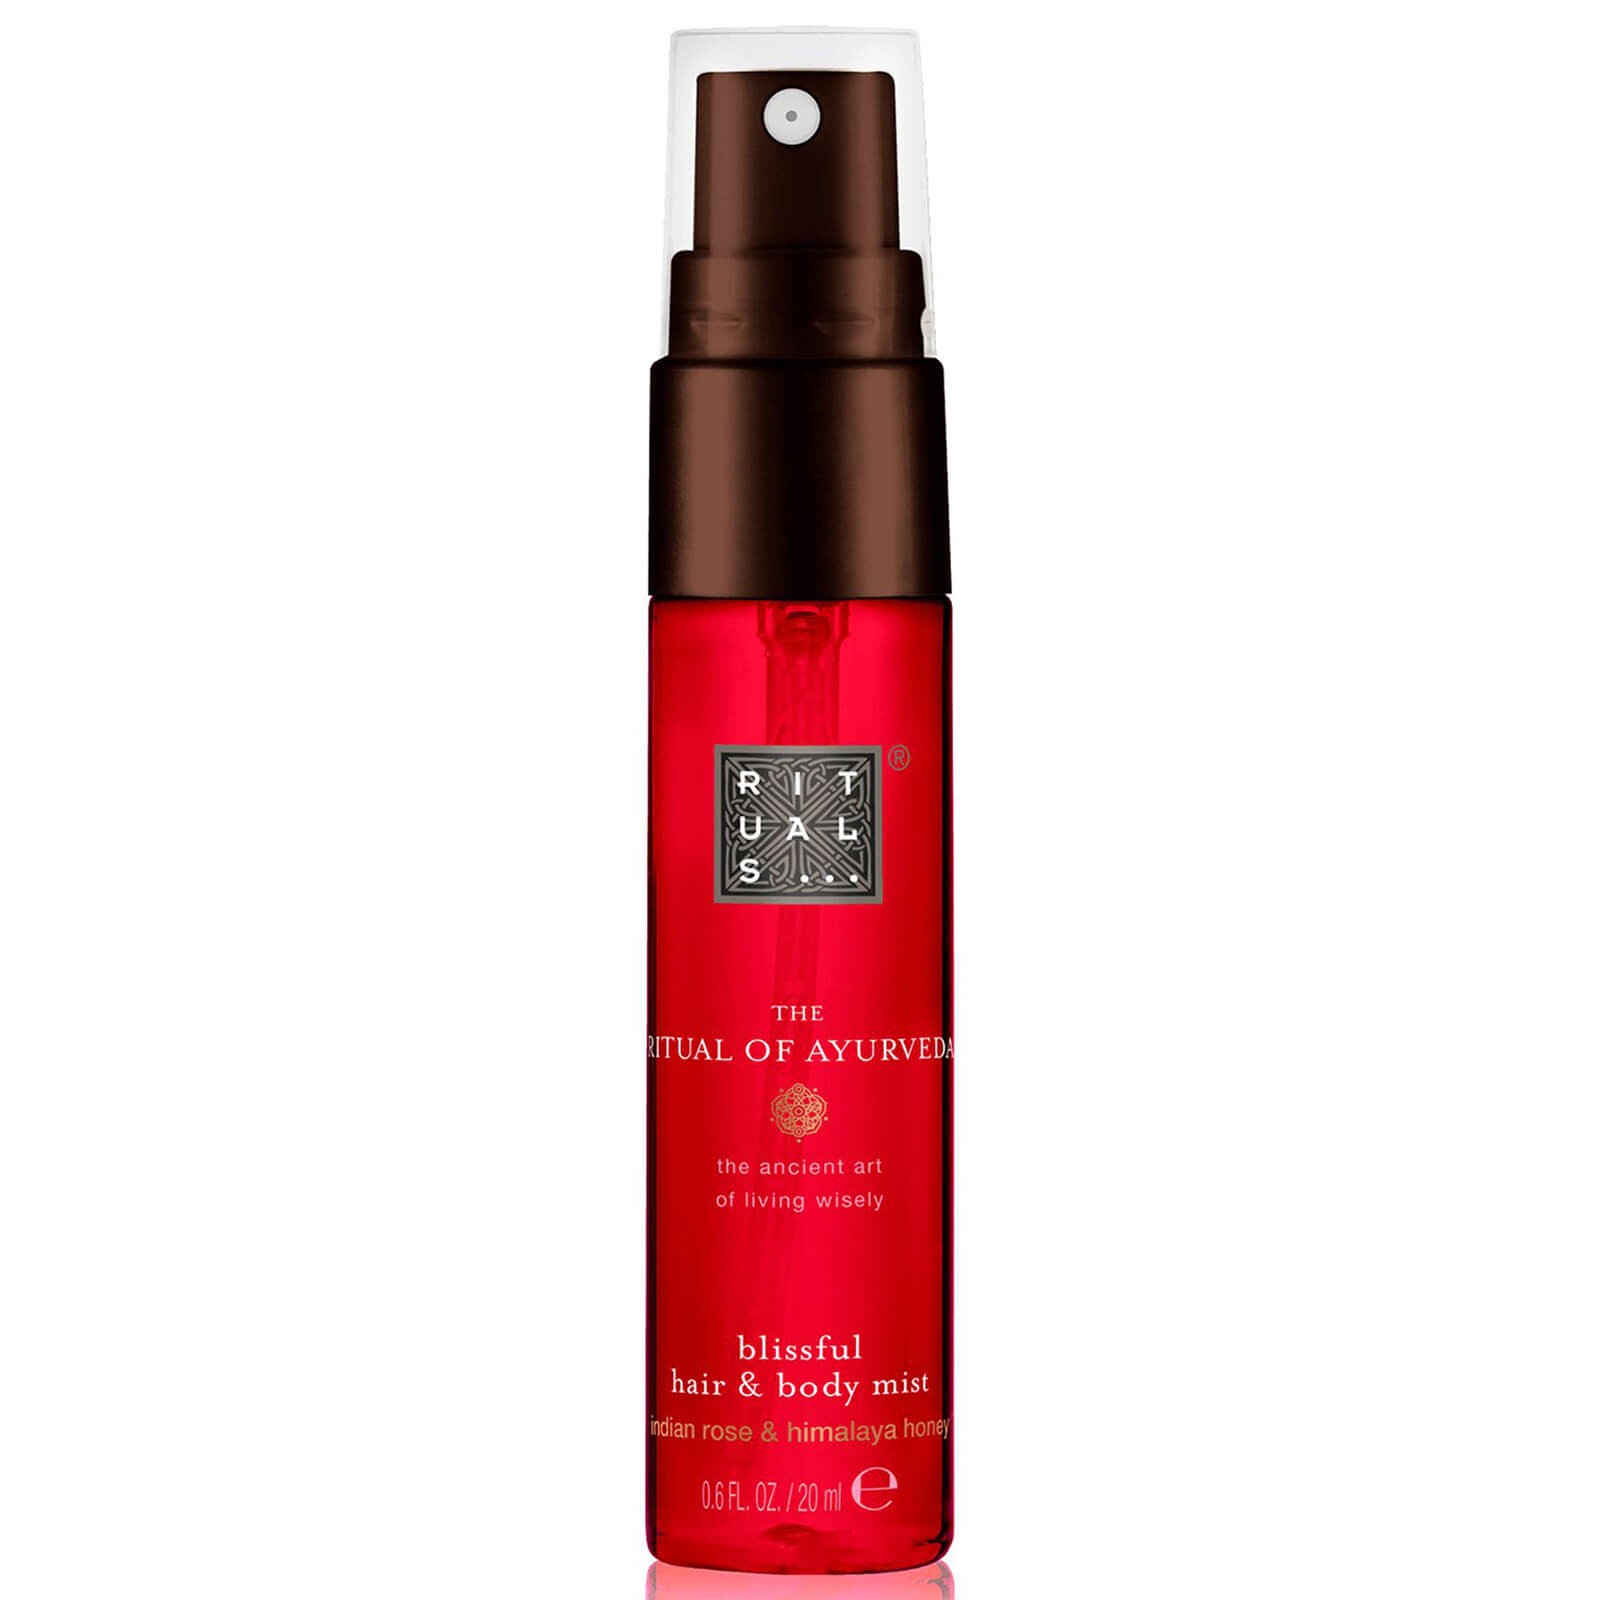 Rituals The Ritual of Ayurveda Hair and Body Mist 20ml